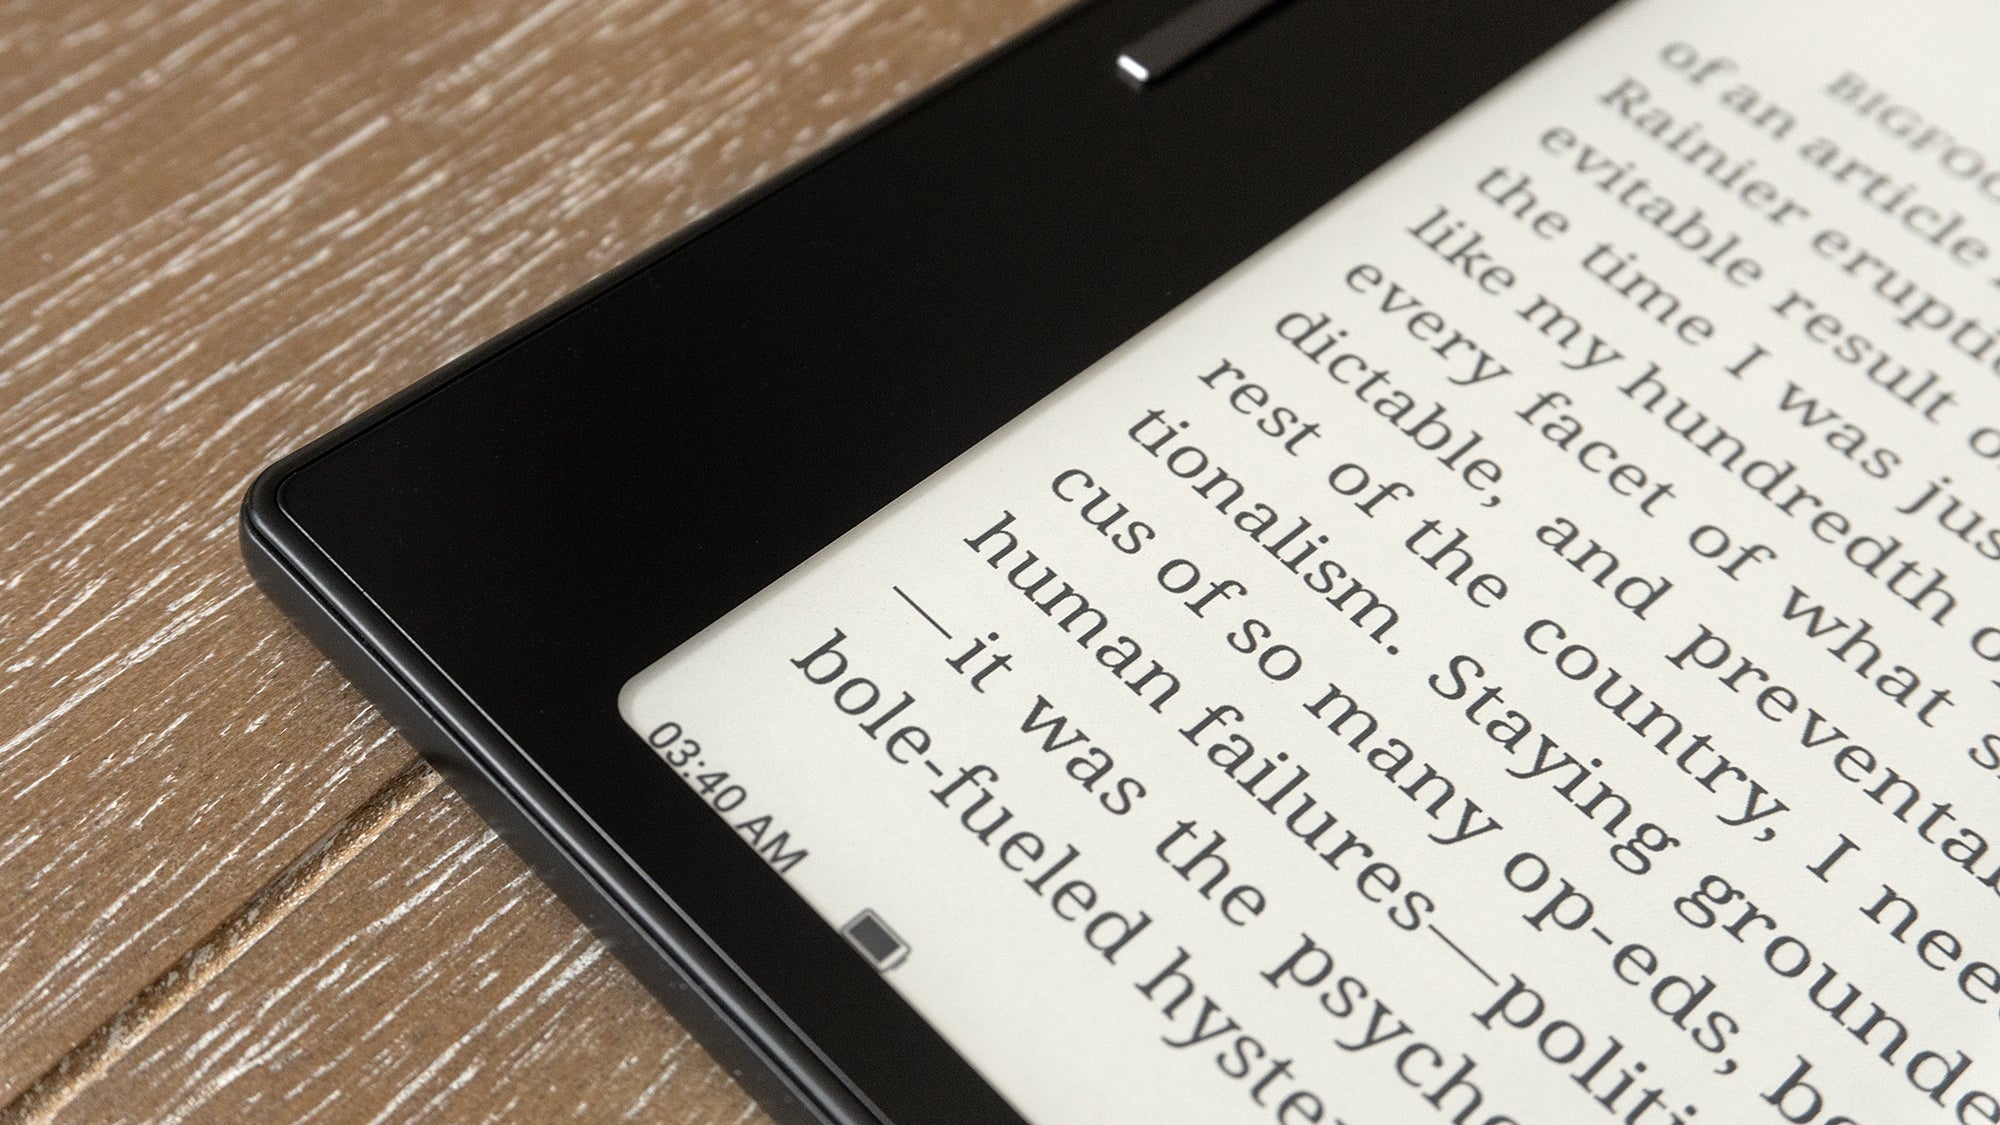 The black version of the Onyx Boox Leaf 2 includes a protective layer of glass, while the white version (not tested) leaves the E Ink panel exposed for less glare and crisper text. (Photo: Andrew Liszewski | Gizmodo)